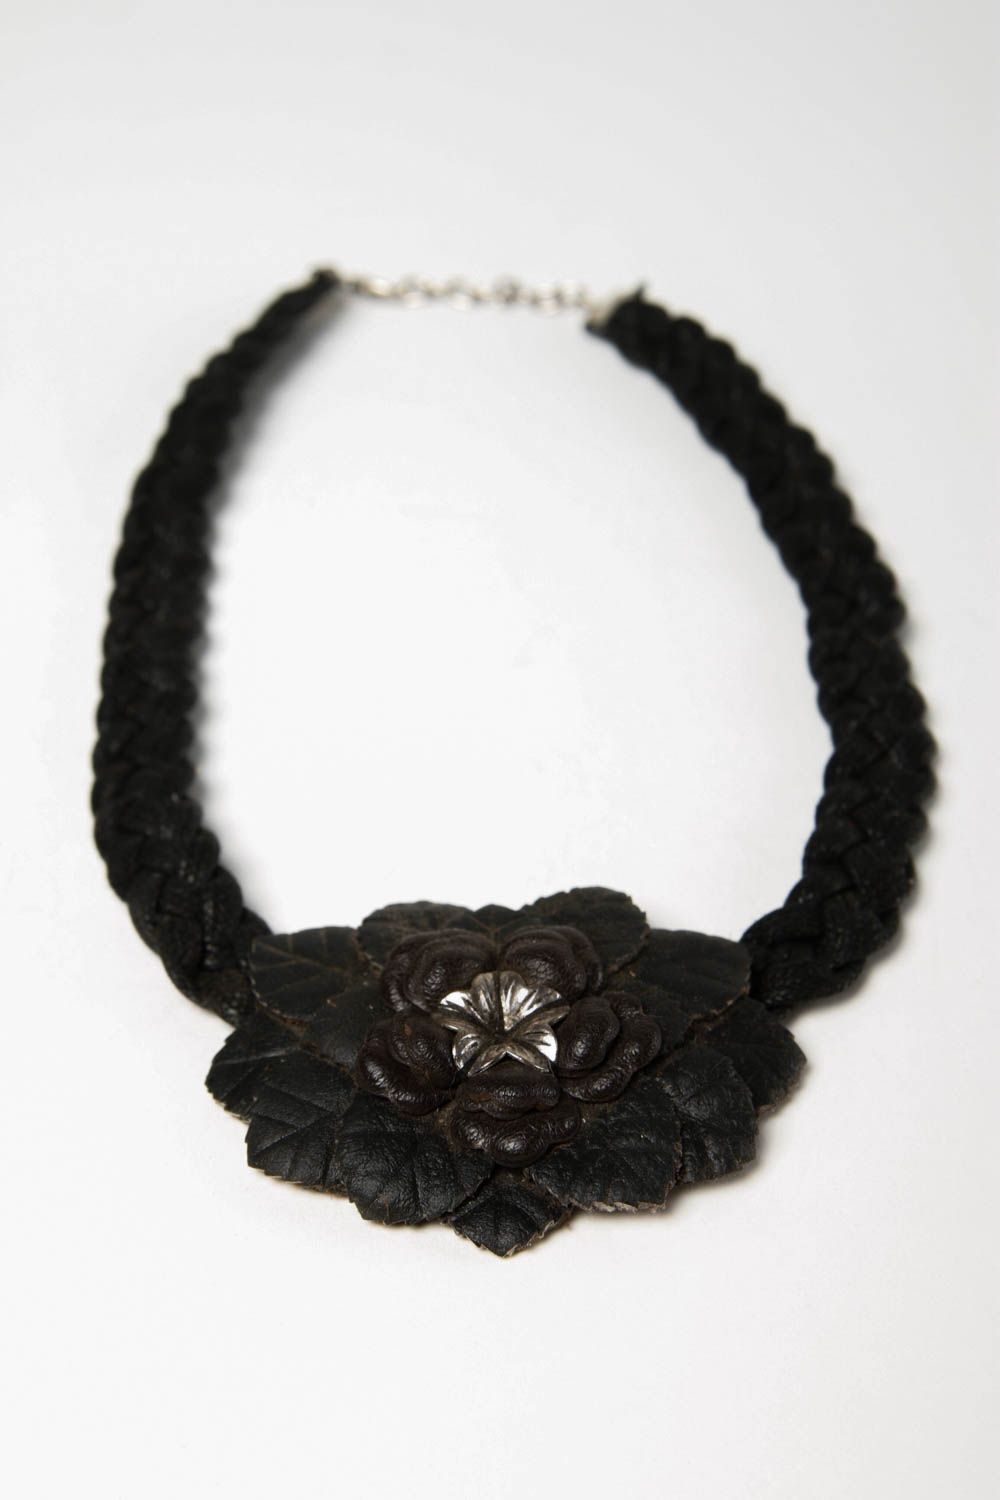 Leather necklace handmade flower jewelry designer accessories leather goods photo 3